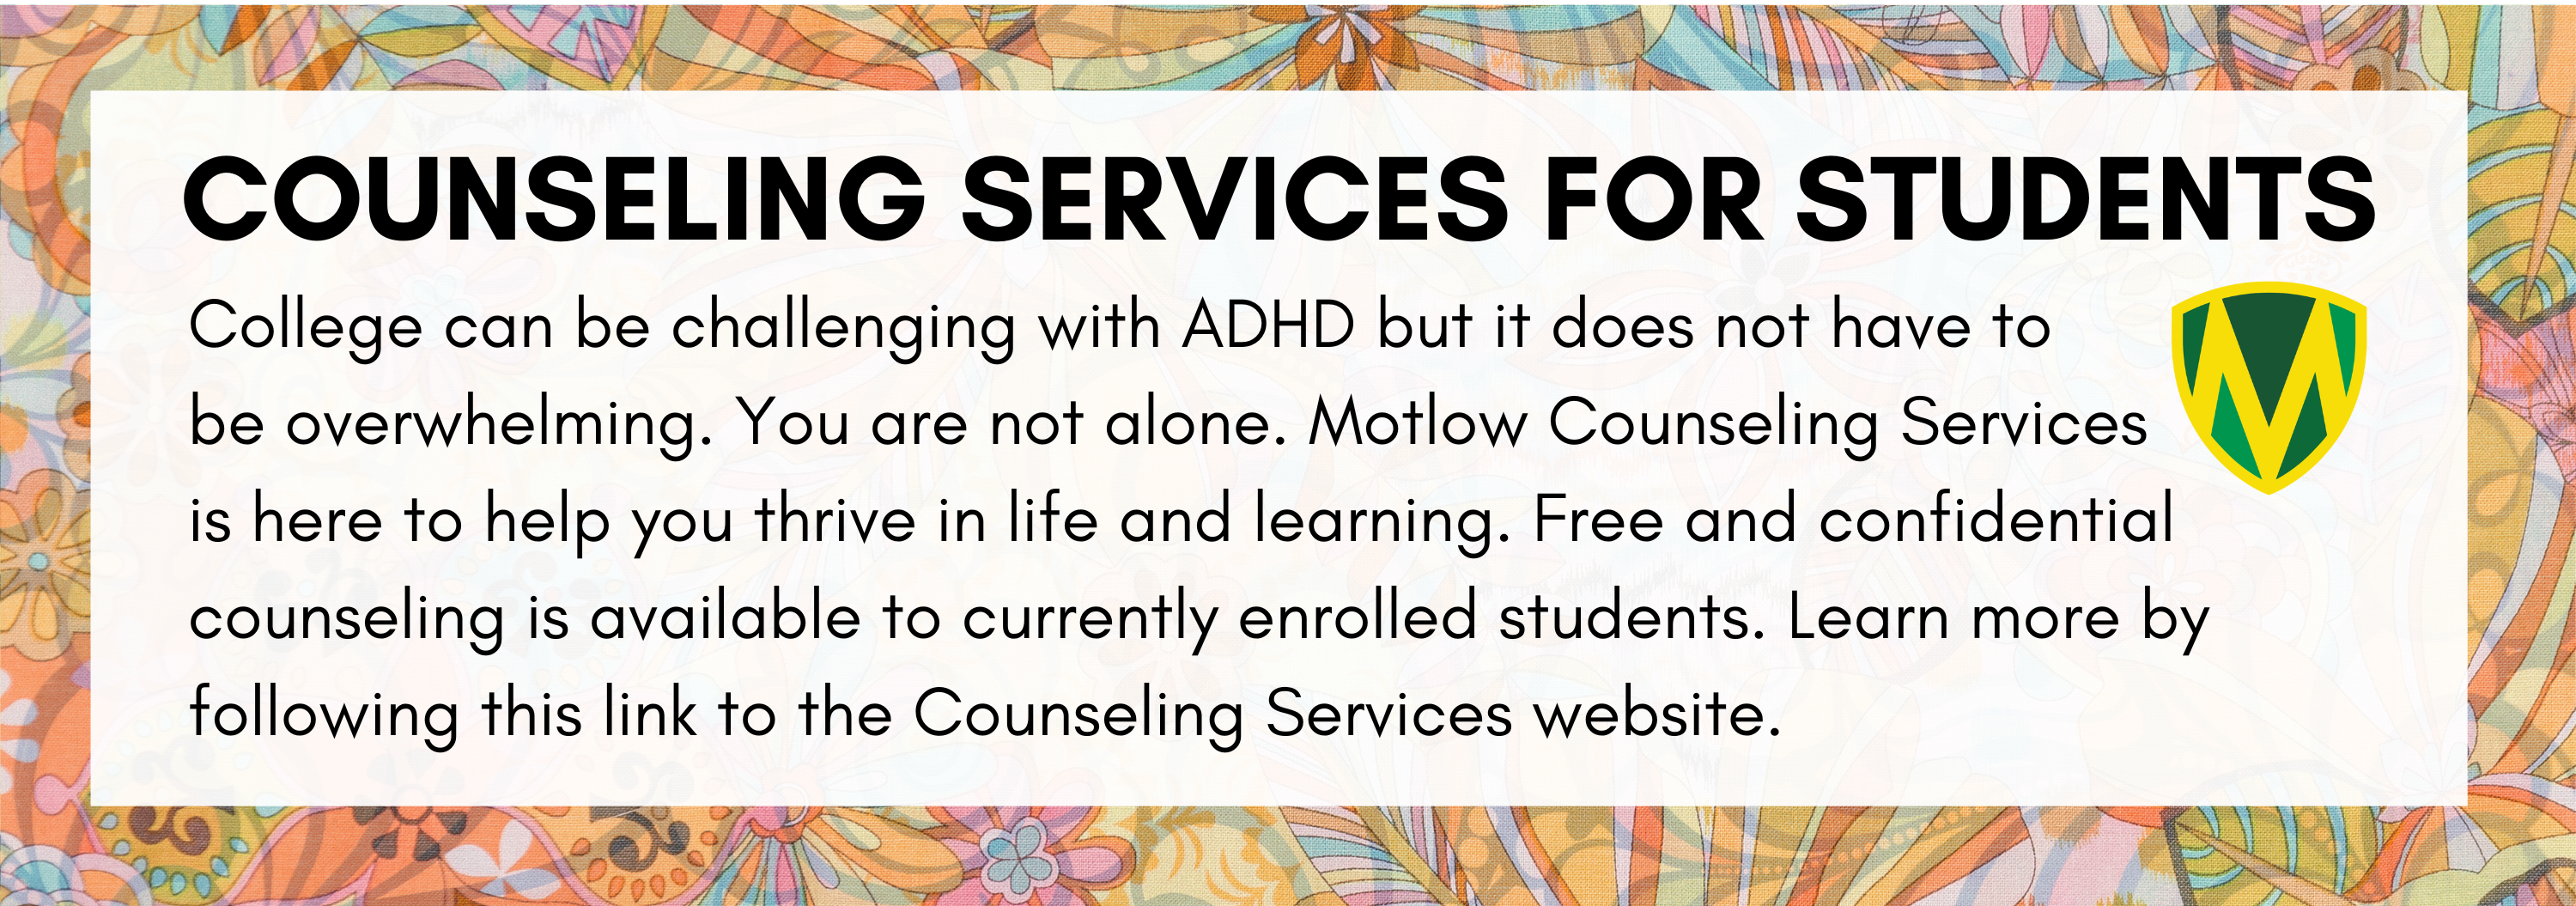 Motlow Counseling Services are available to students